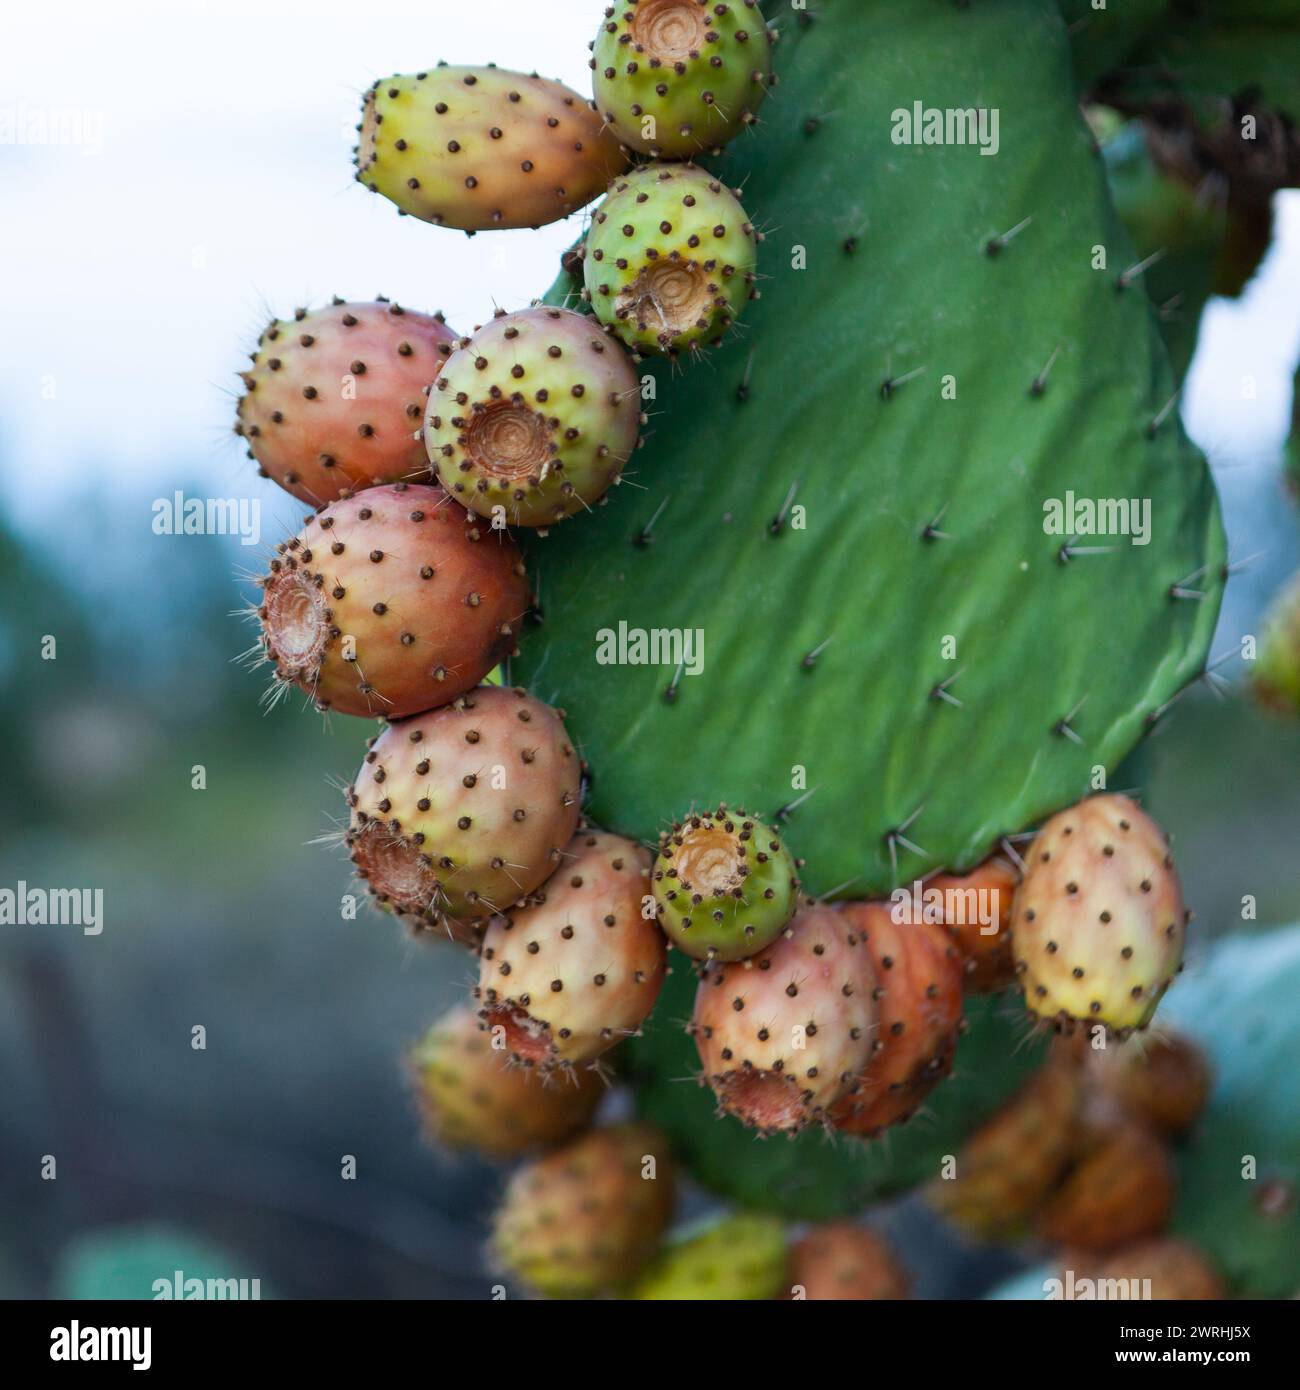 Prickly pear fruits close view on green cactus. Stock Photo